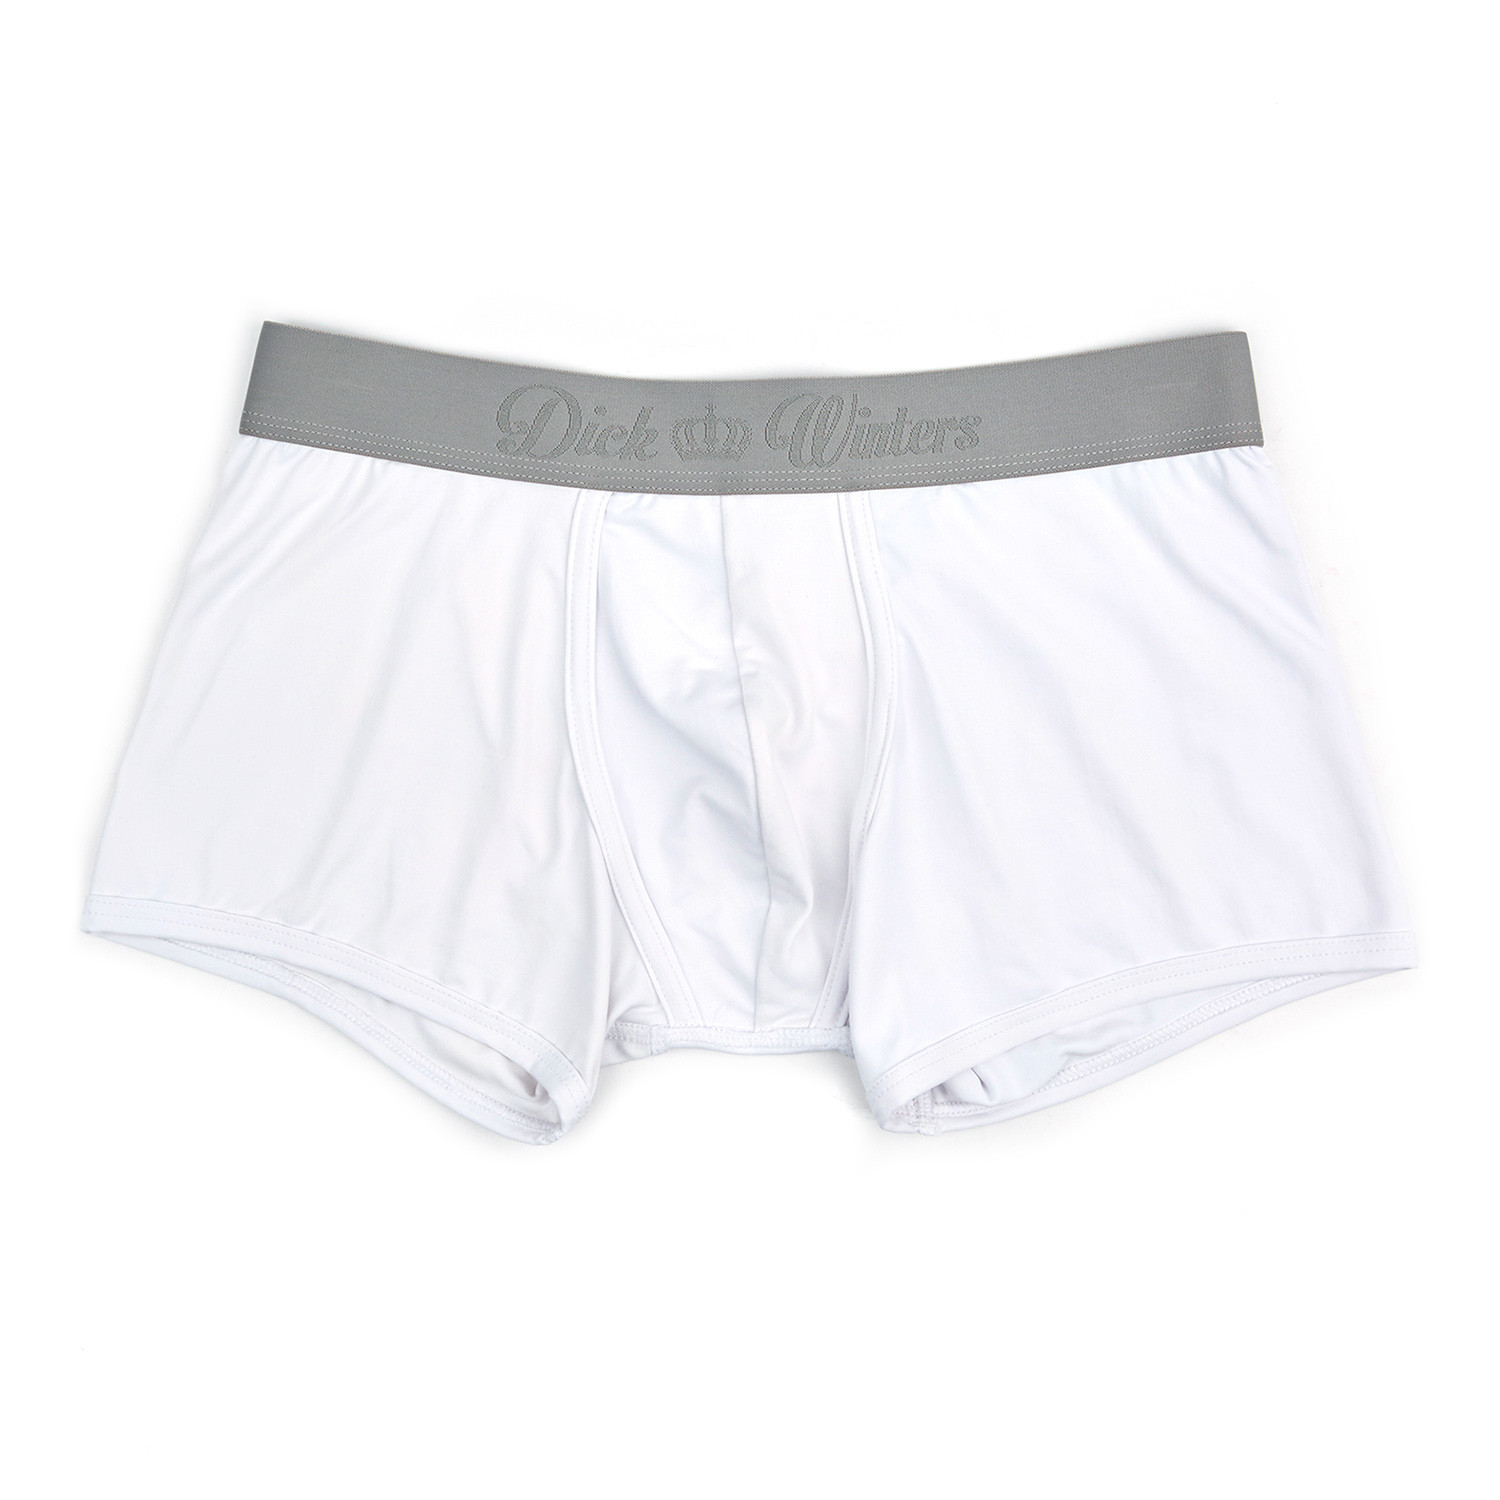 Classic Dick Boxer Short // White (S) - Dick Winters - Touch of Modern